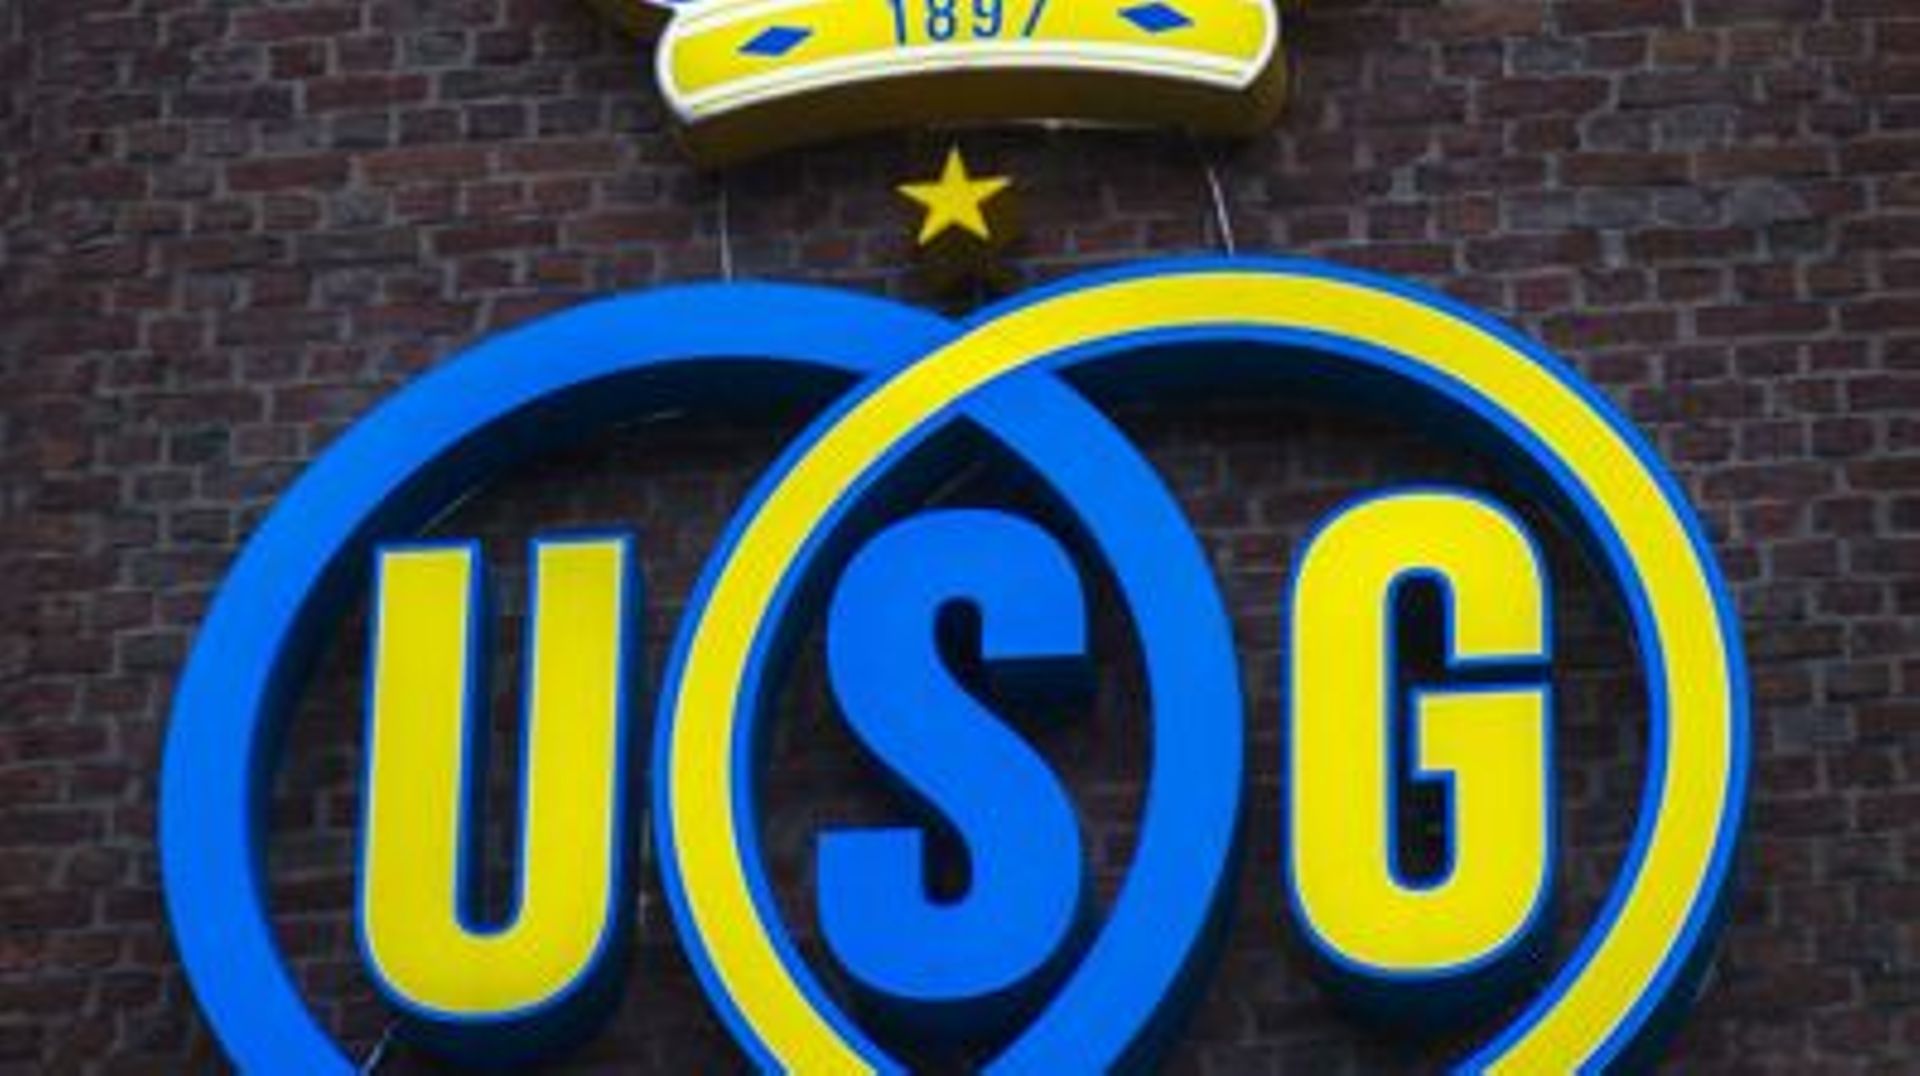 20160110 – BRUSSELS, BELGIUM : Illustration picture shows the logo of Union Saint Gilloise ahead of a friendly soccer game between second Division team Royale Union Saint-Gilloise and fourth division team RWDM Molenbeek, the derby of Brussels, Sunday 10 J